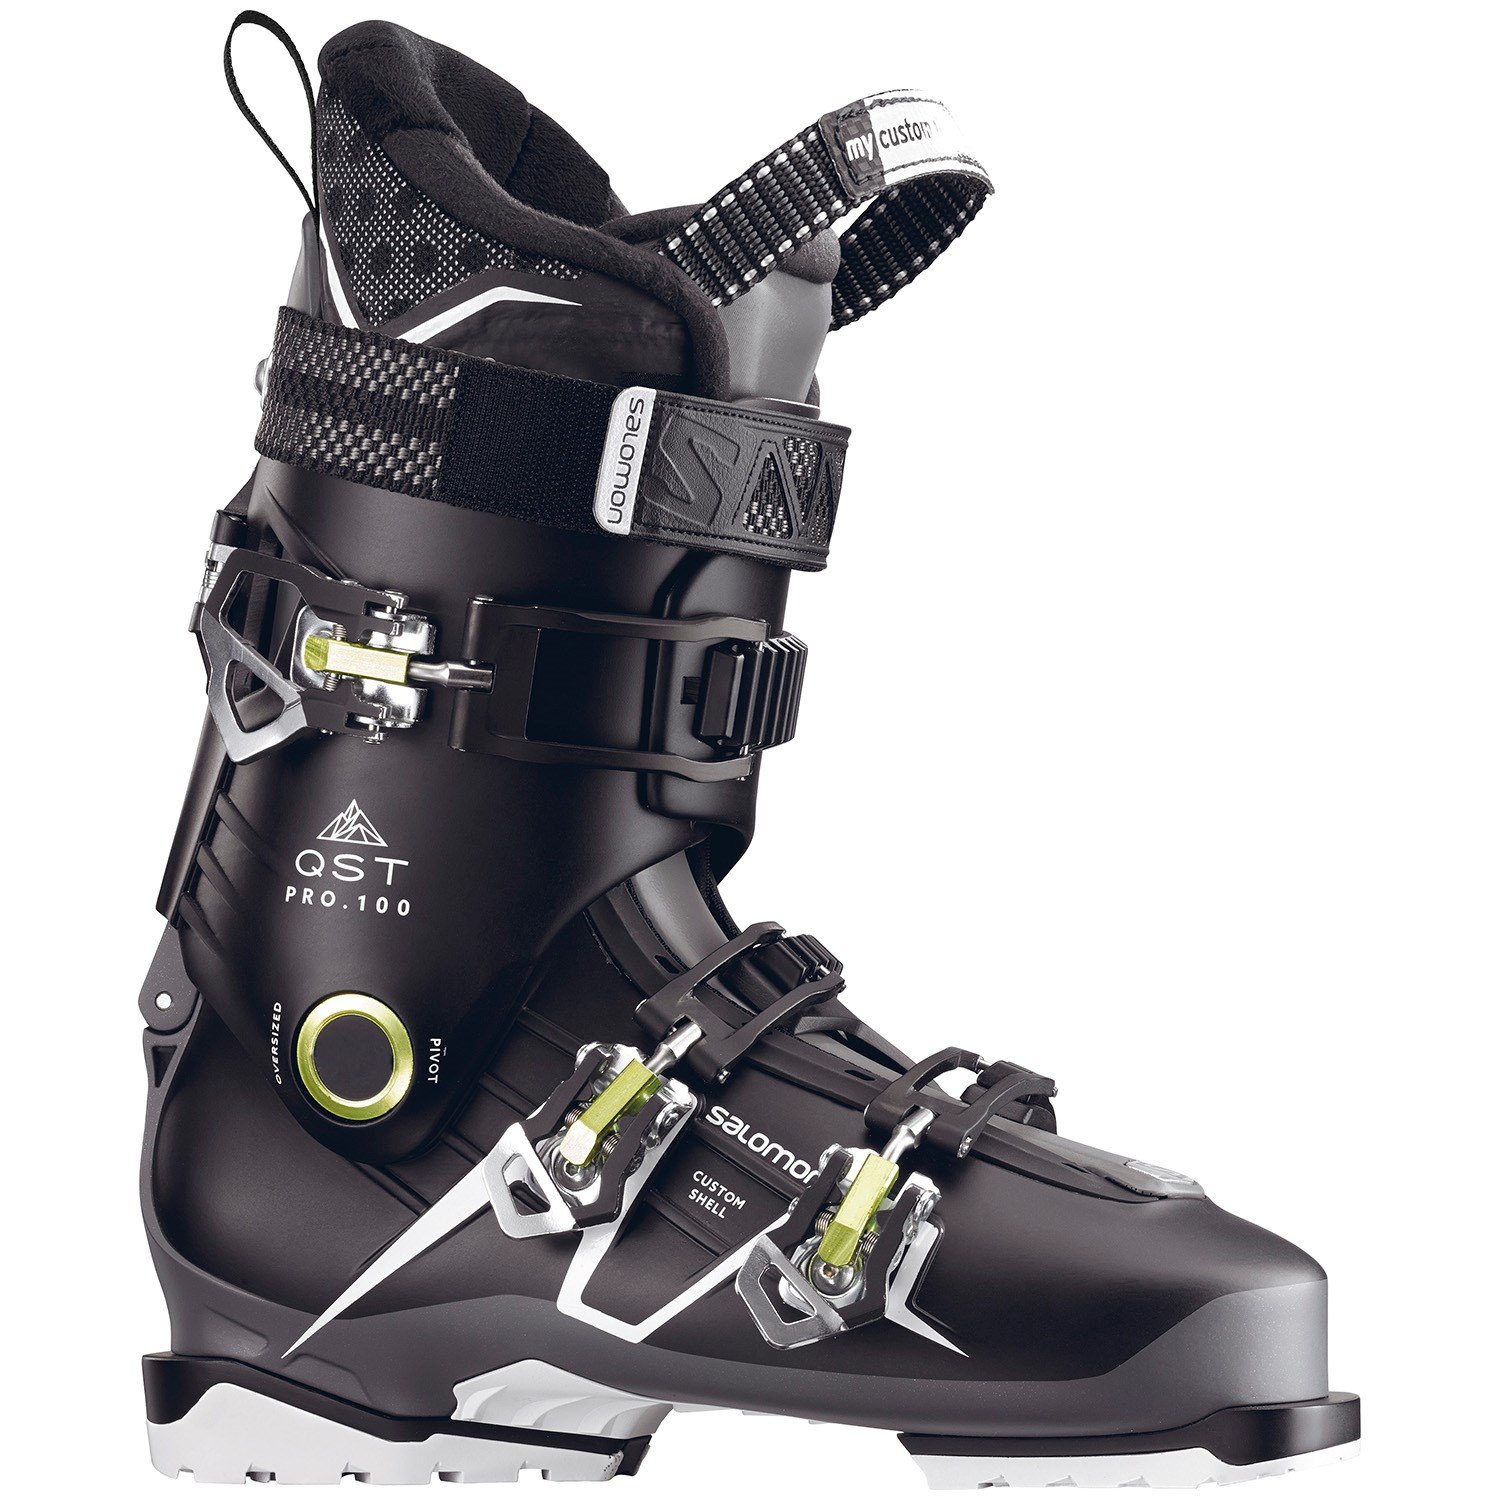 Dissatisfied Exclude intentional Salomon QST Pro 100 Ski Boots 2018 | evo